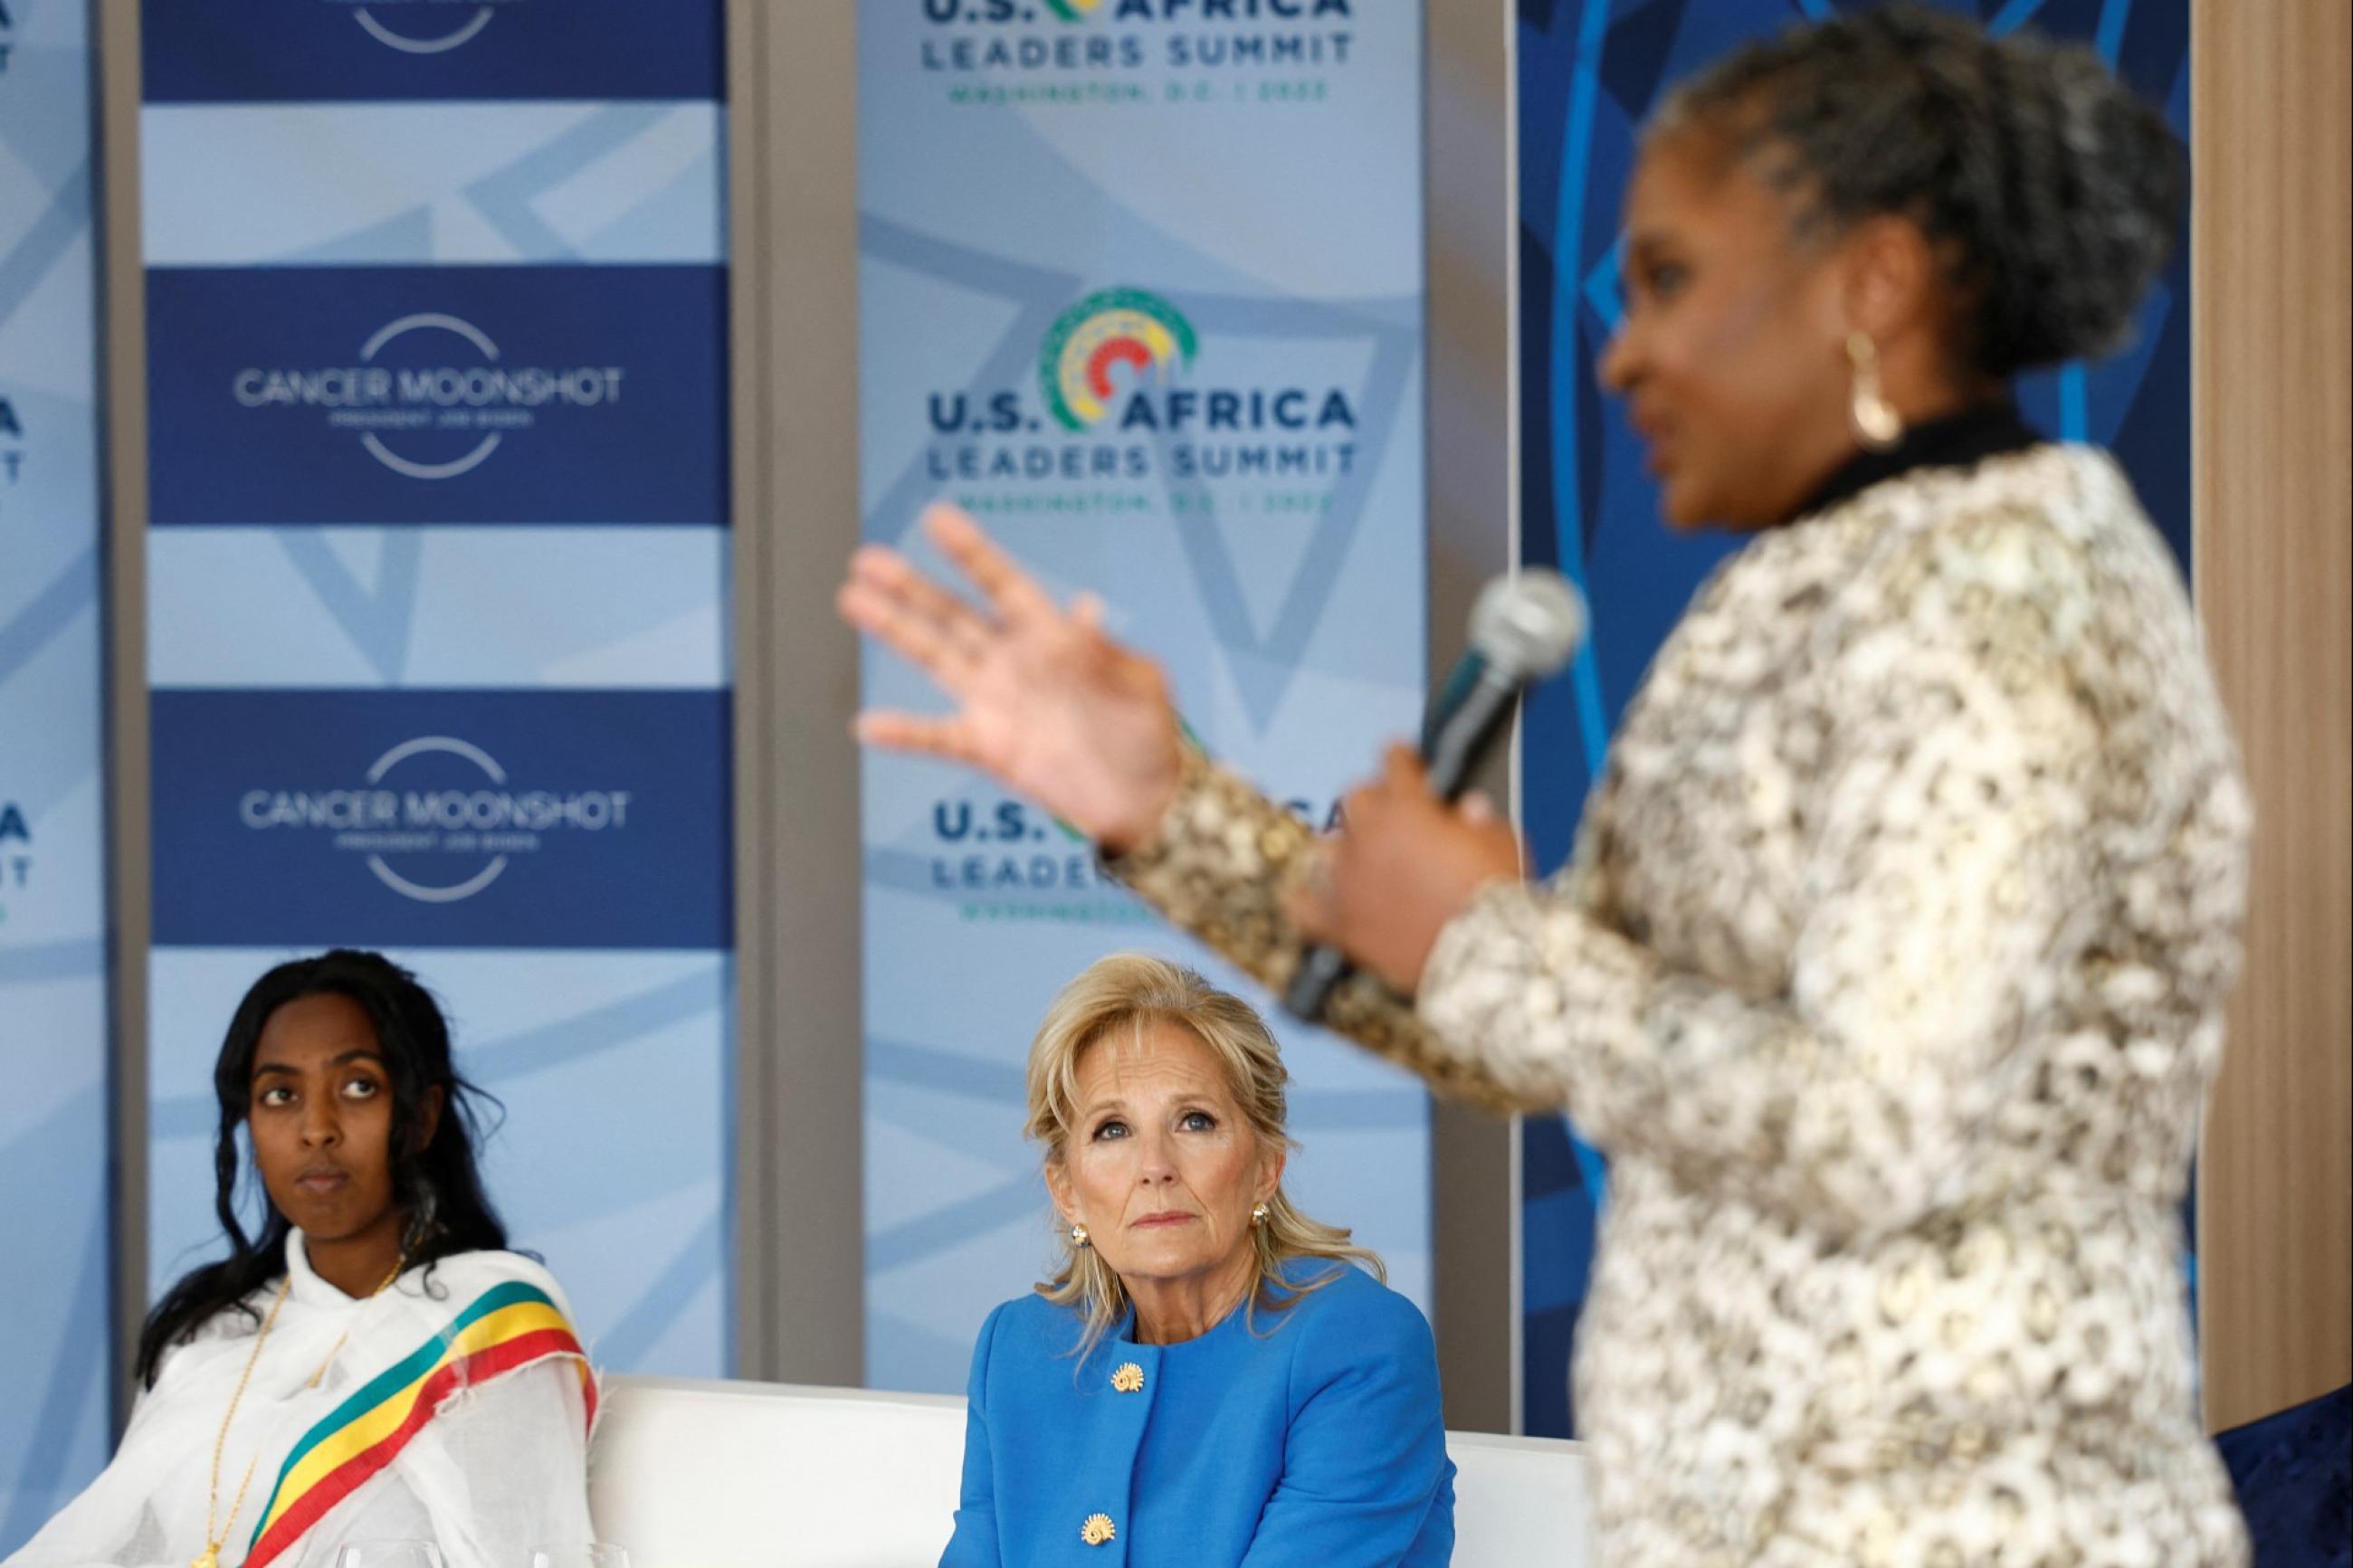 Jill Biden listens as Namibia's first lady Monica Geingos speaks, at a conversation with spouses of leaders attending the U.S.-Africa Leaders Summit, in Washington, DC, on December 14, 2022.